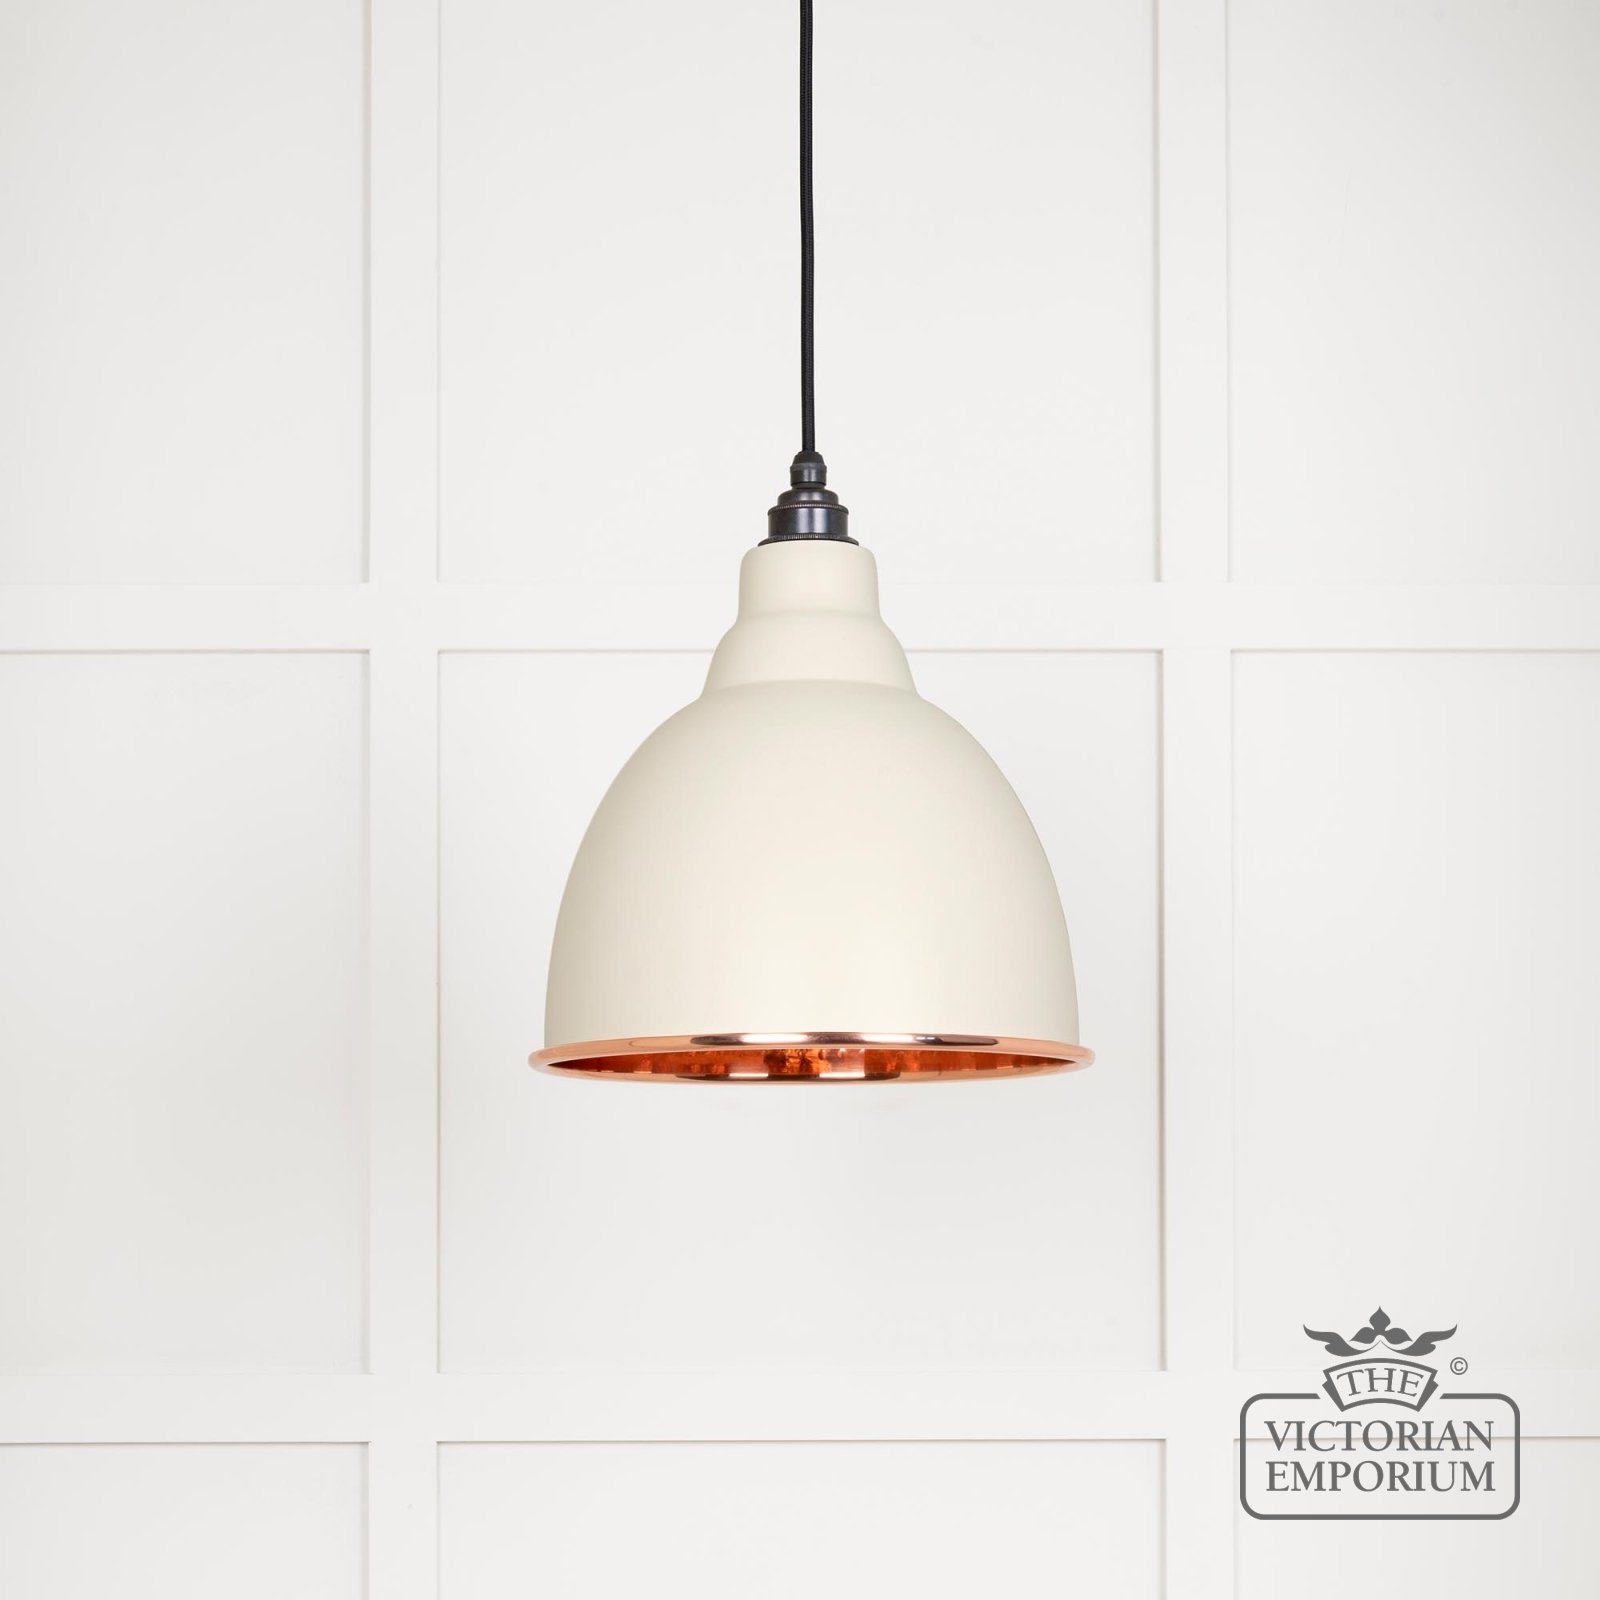 Brindle pendant light in Teasel with hammered copper interior